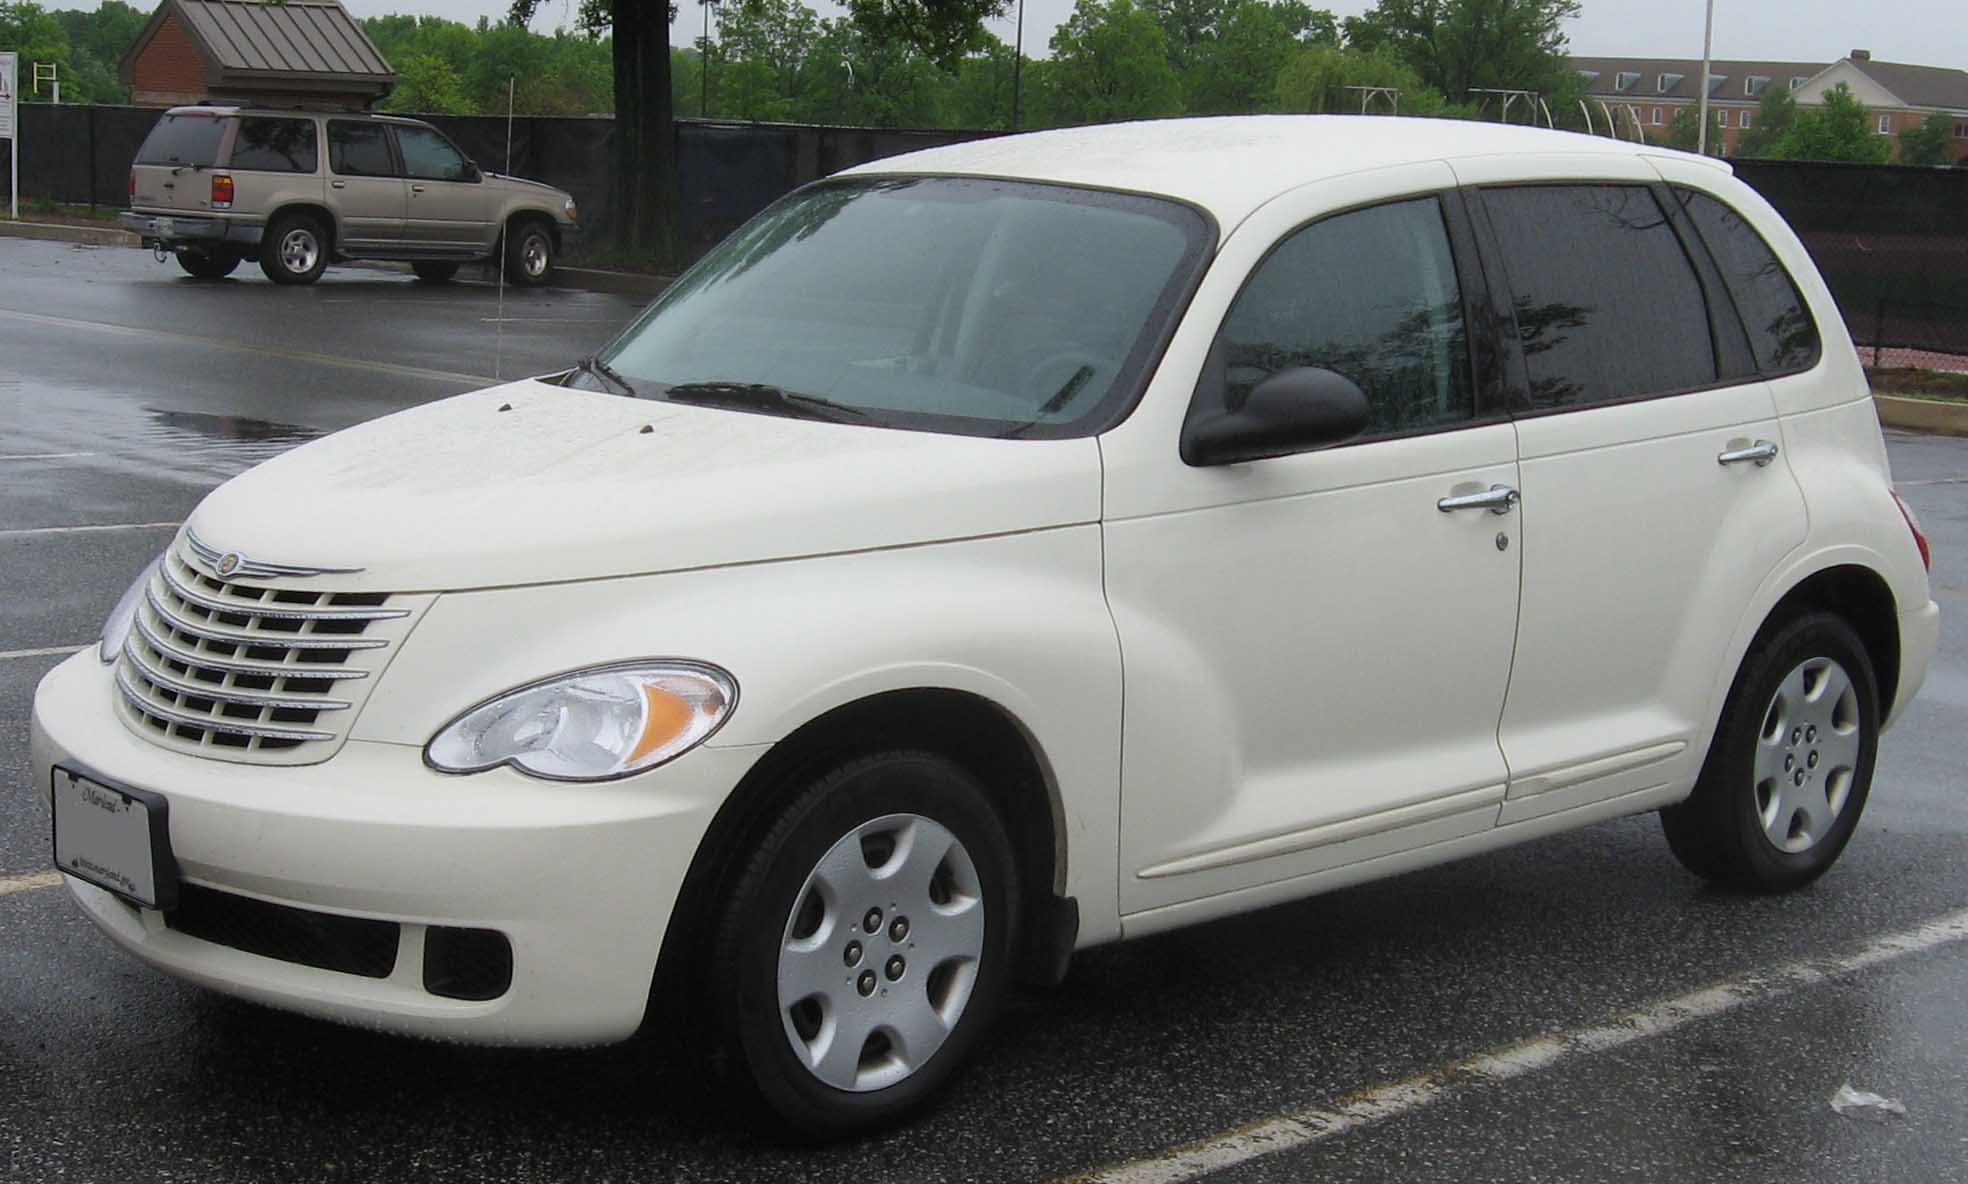 How to Install Tie Rod Ends On a Pt Cruiser